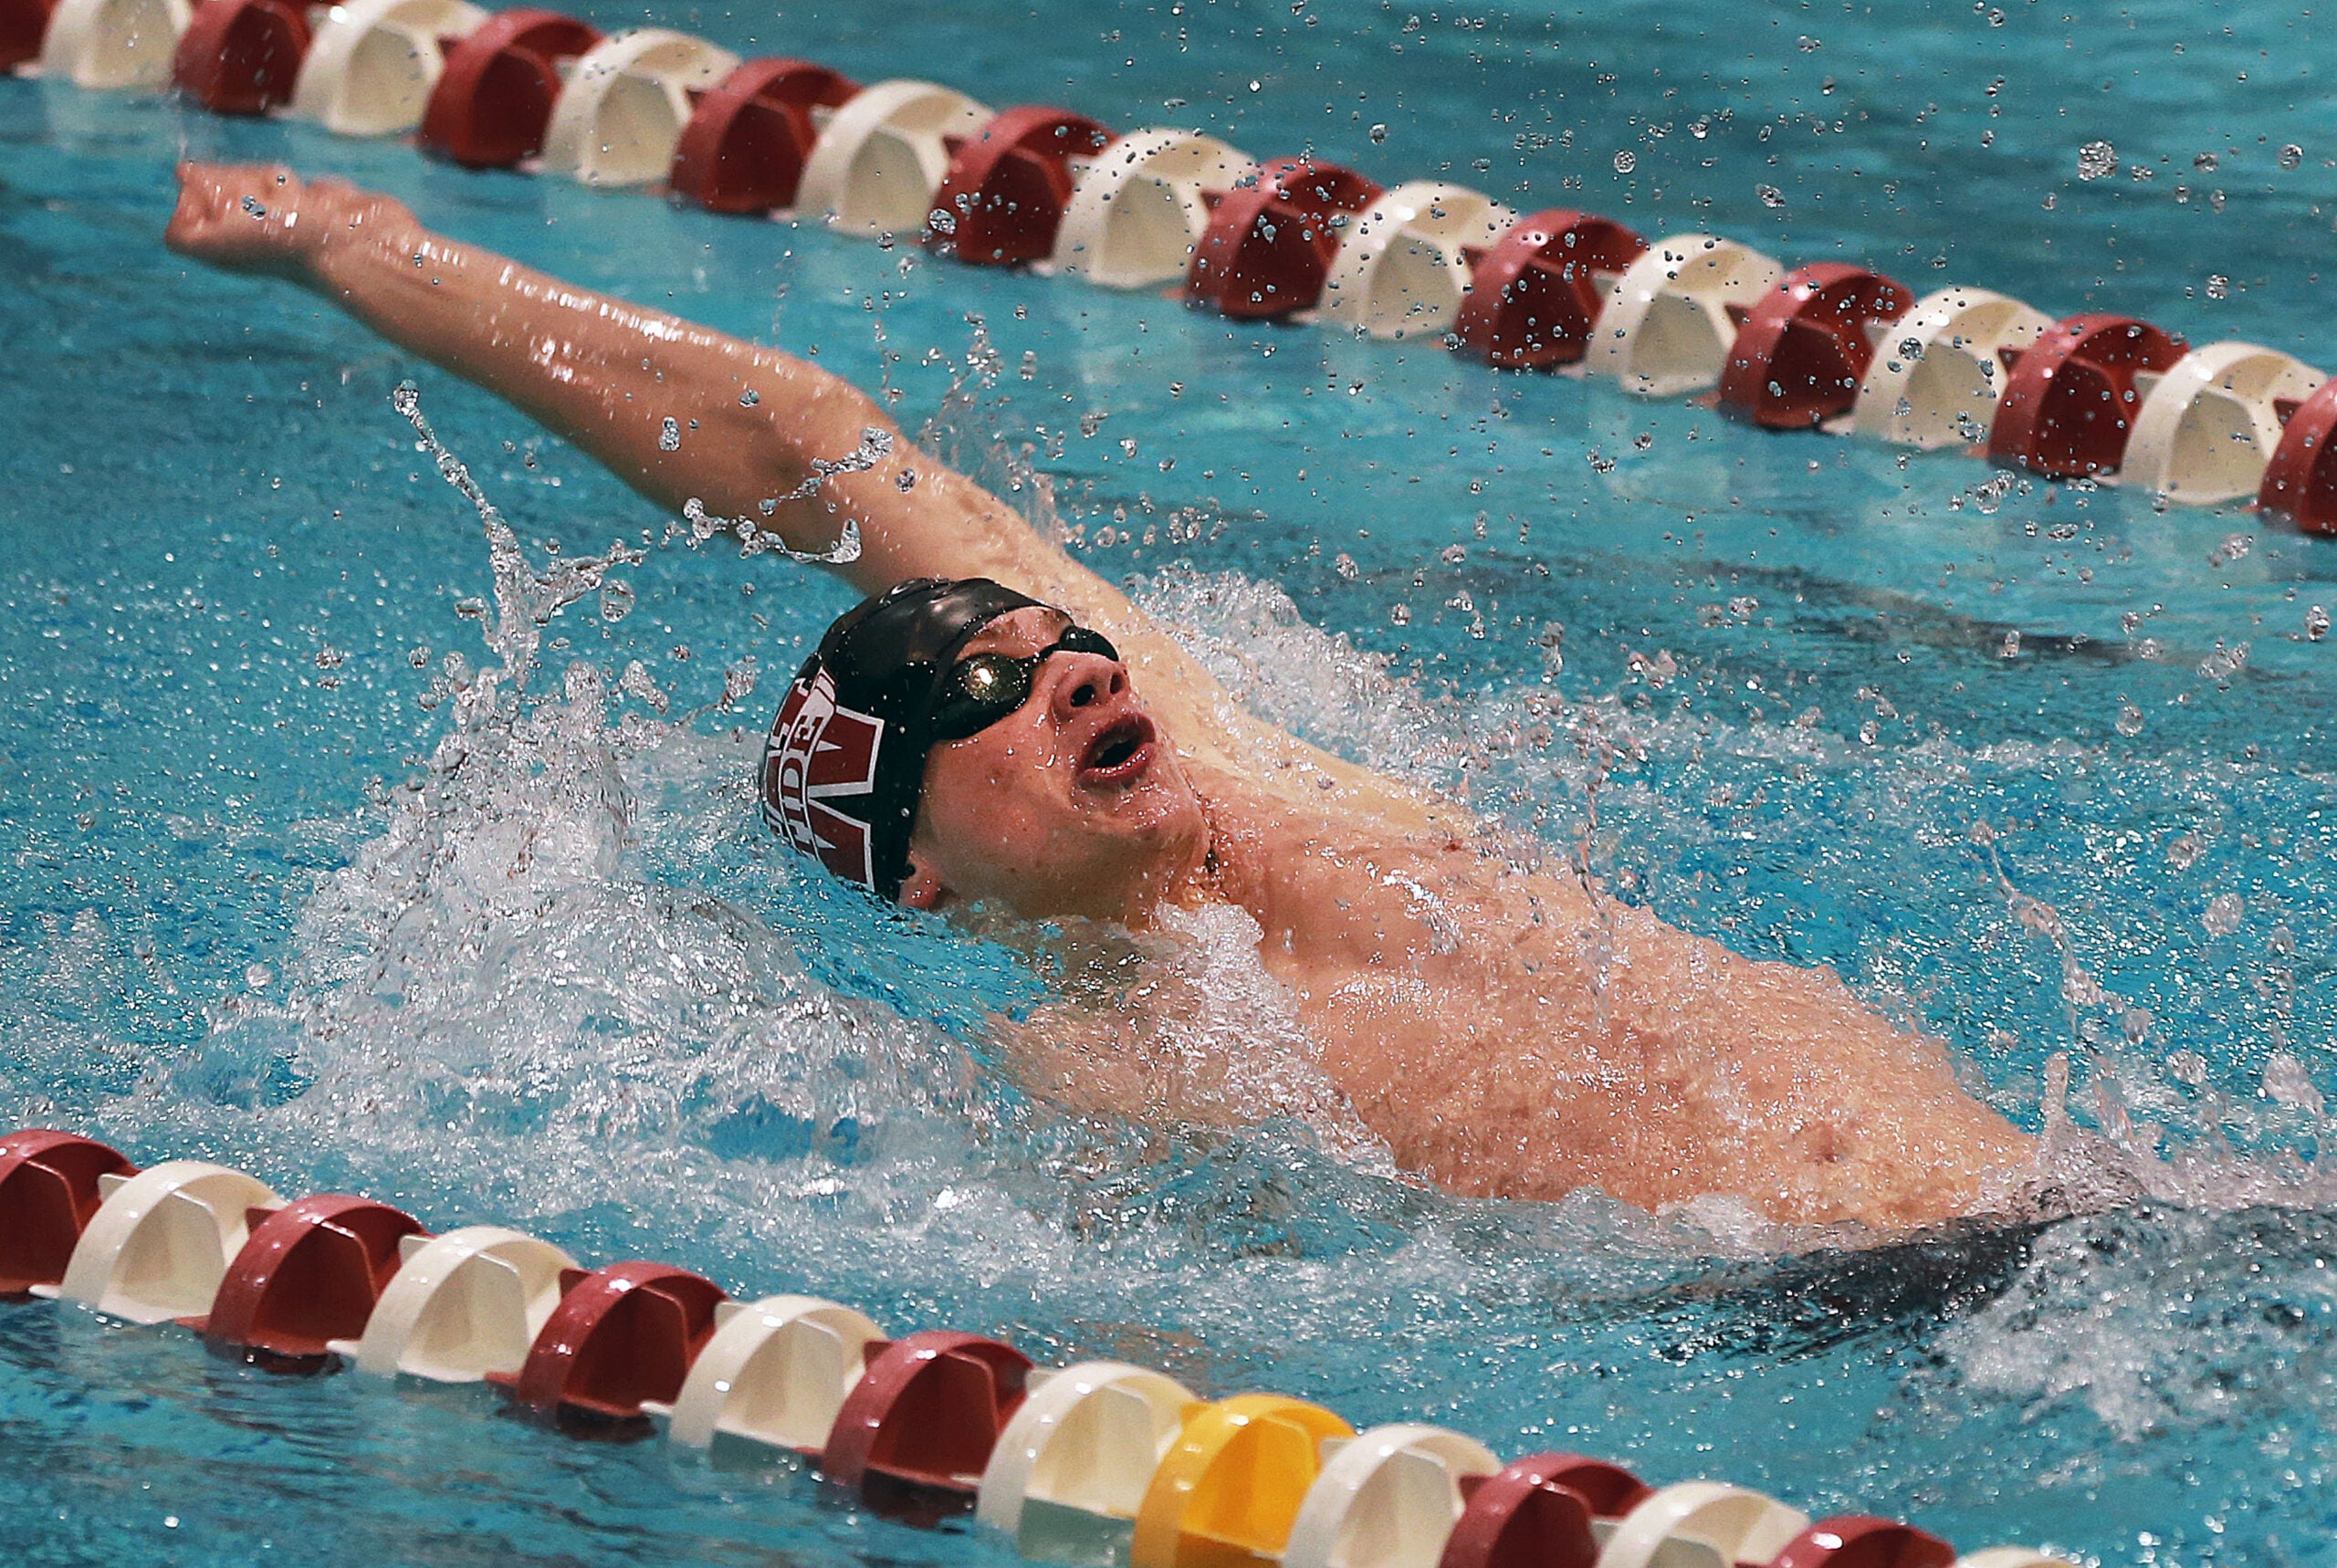 Weston boys cruise to victory in MIAA Division 2 state swimming meet